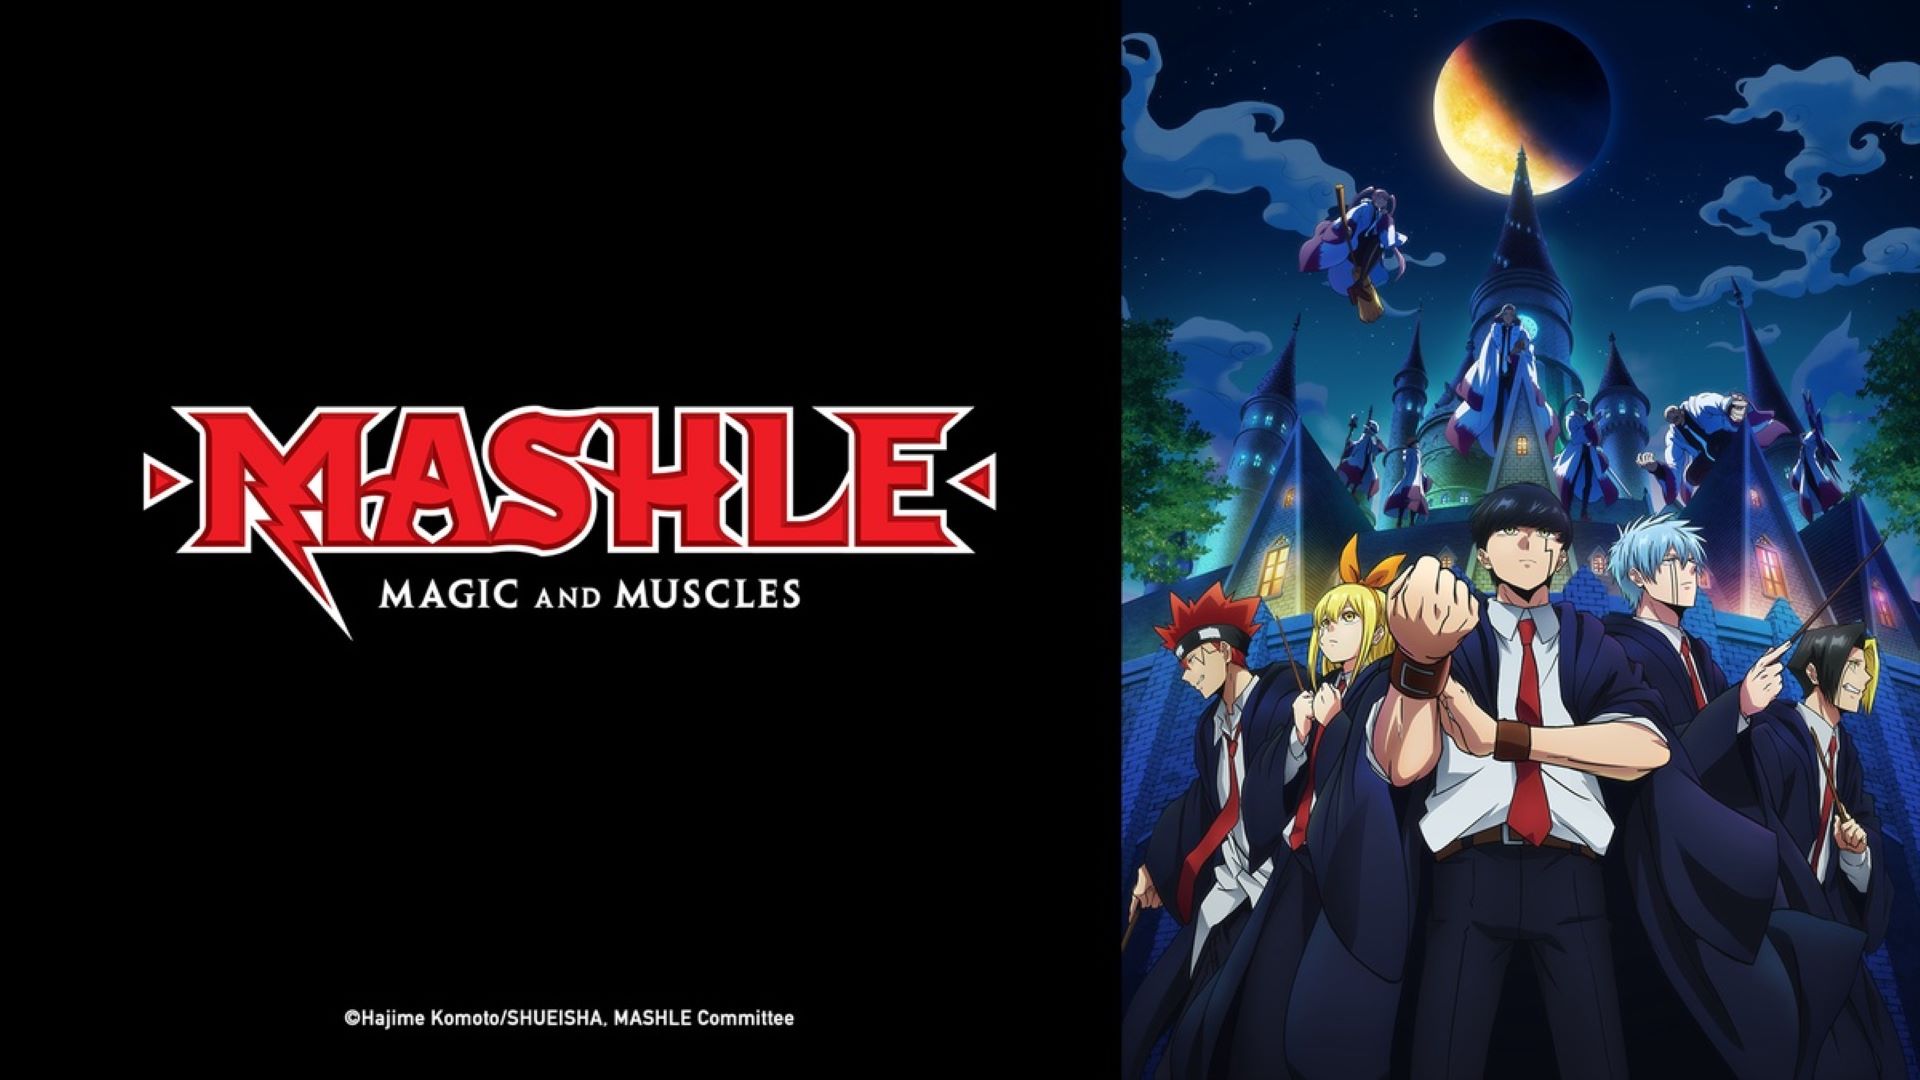 Mashle episode 4 release date time and anime preview stills revealed